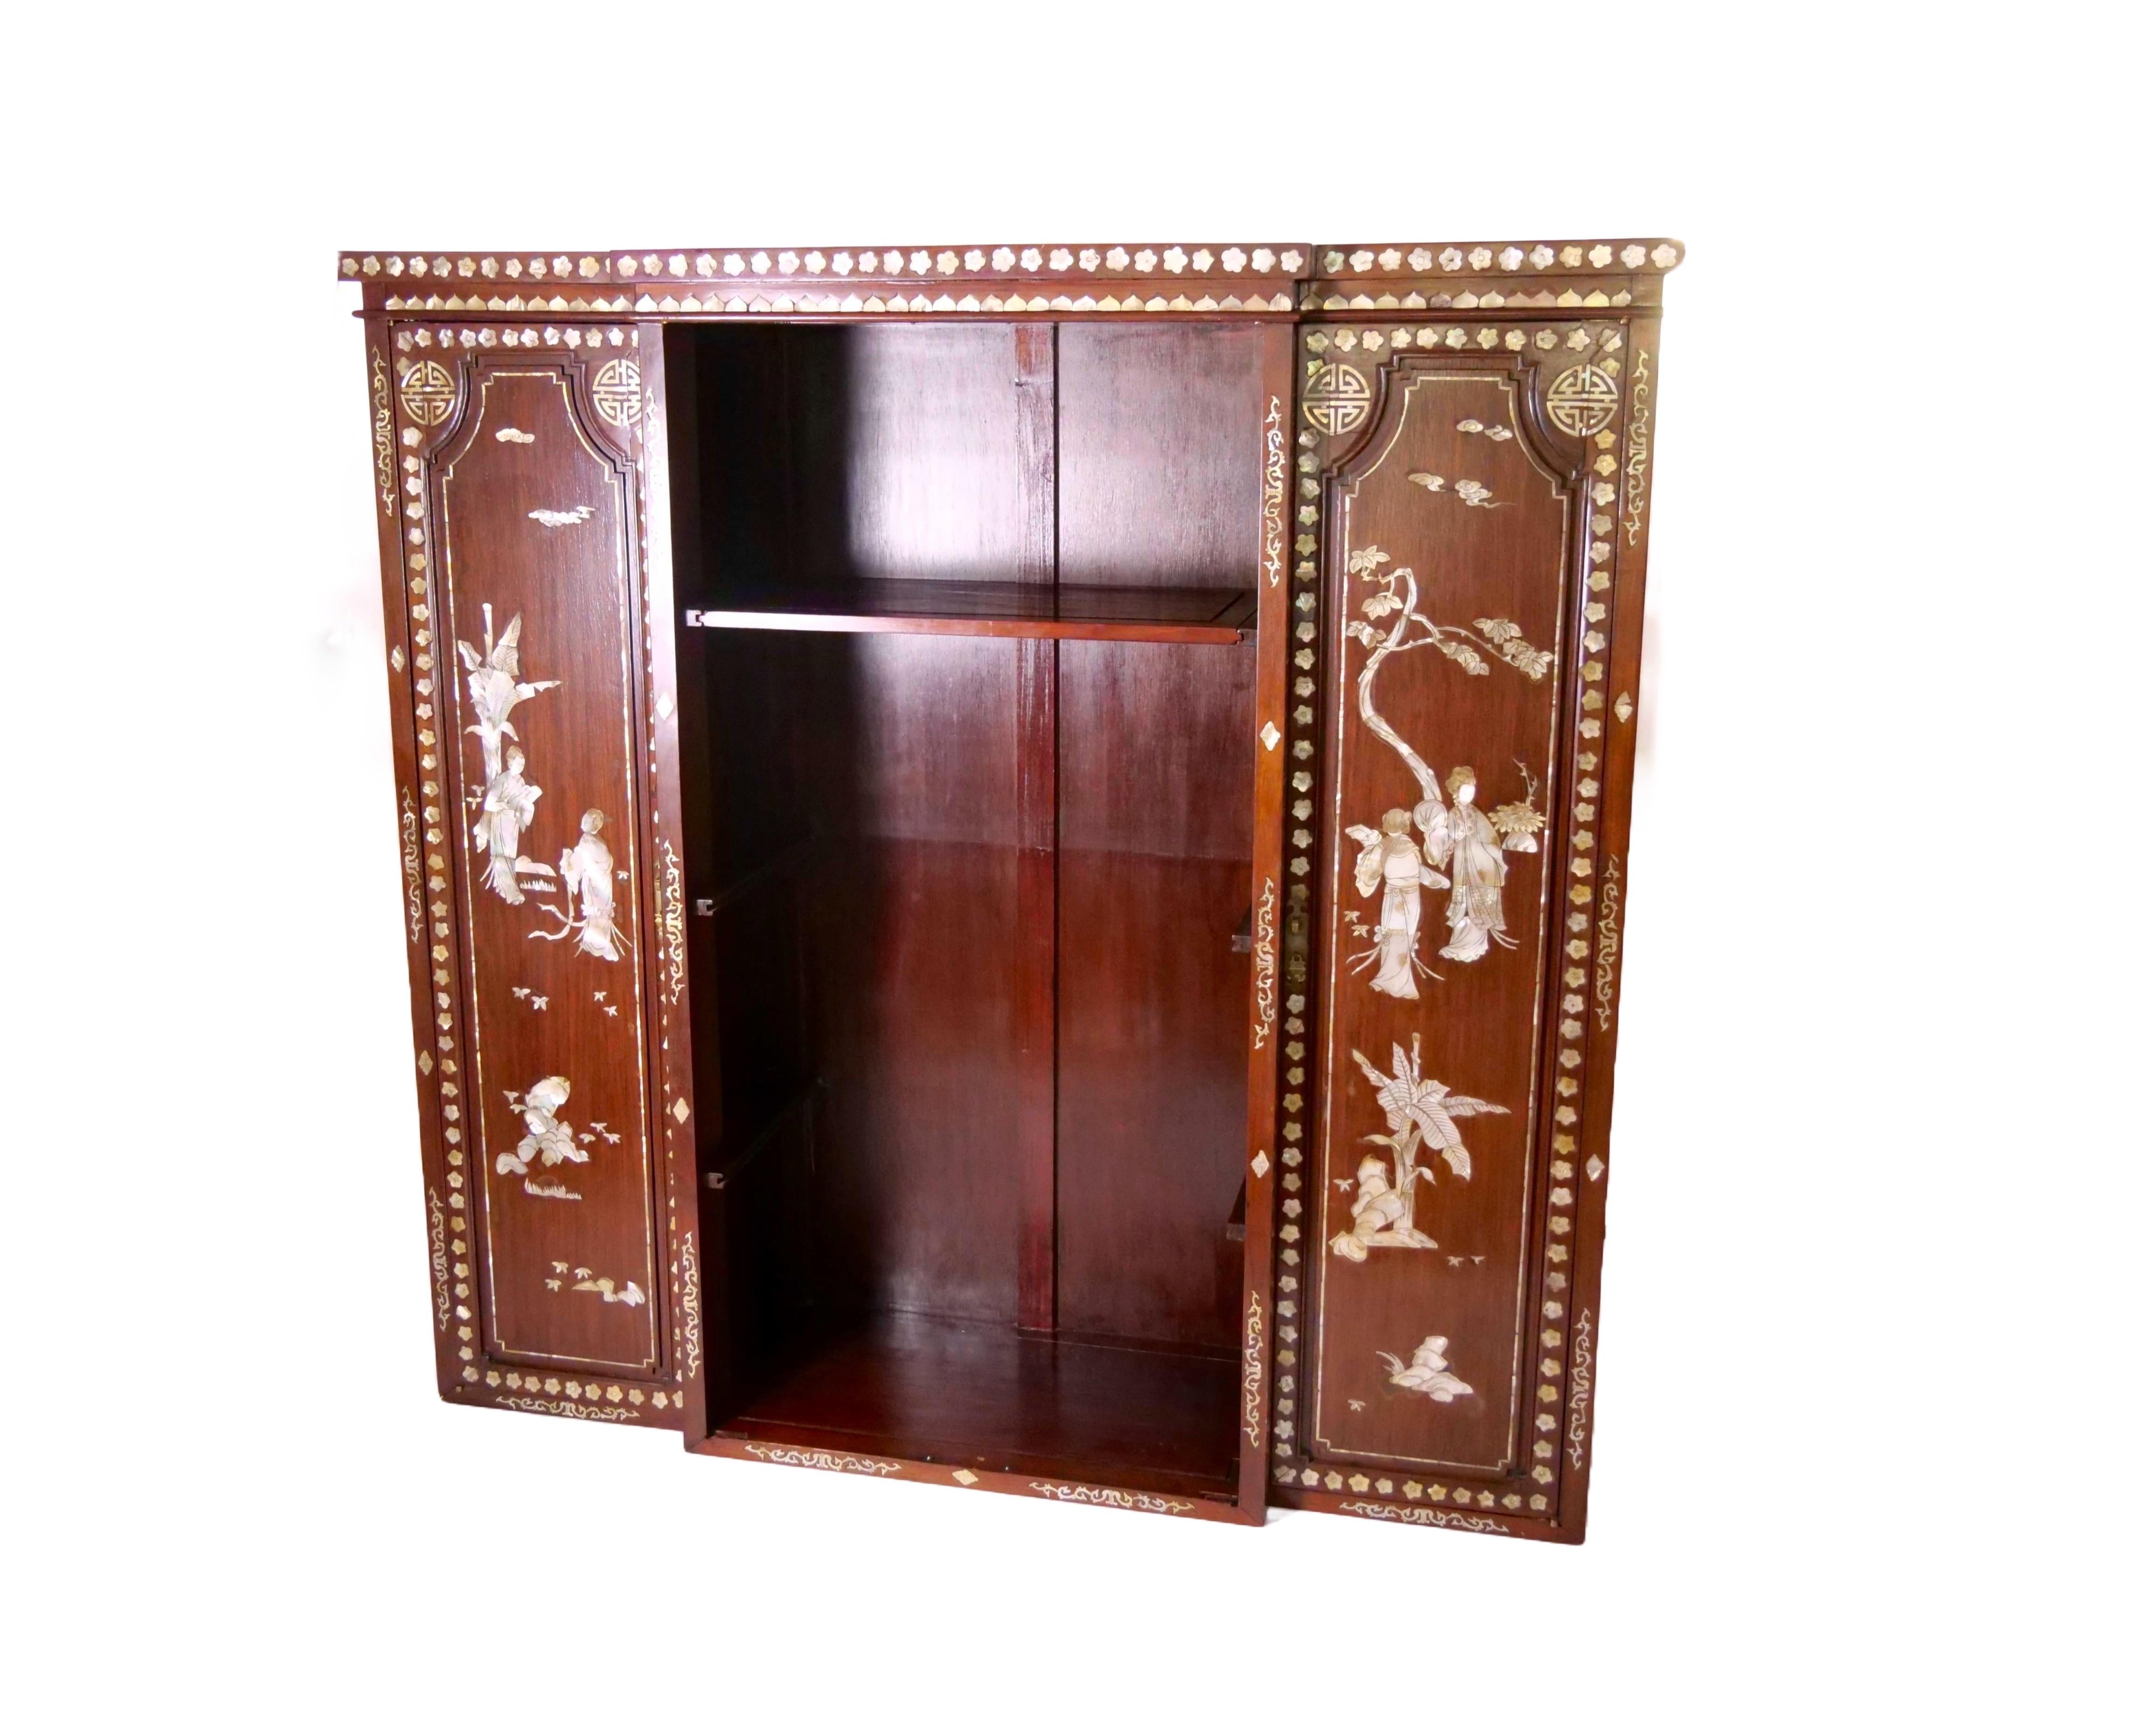 Step into the enchanting world of Anglo-Indian craftsmanship with this captivating Mother-of-Pearl Inlaid Two-Part Bookcase/Display Cabinet, showcasing the exquisite beauty of early 20th-century Noorish style.
Adorned with intricate mother-of-pearl